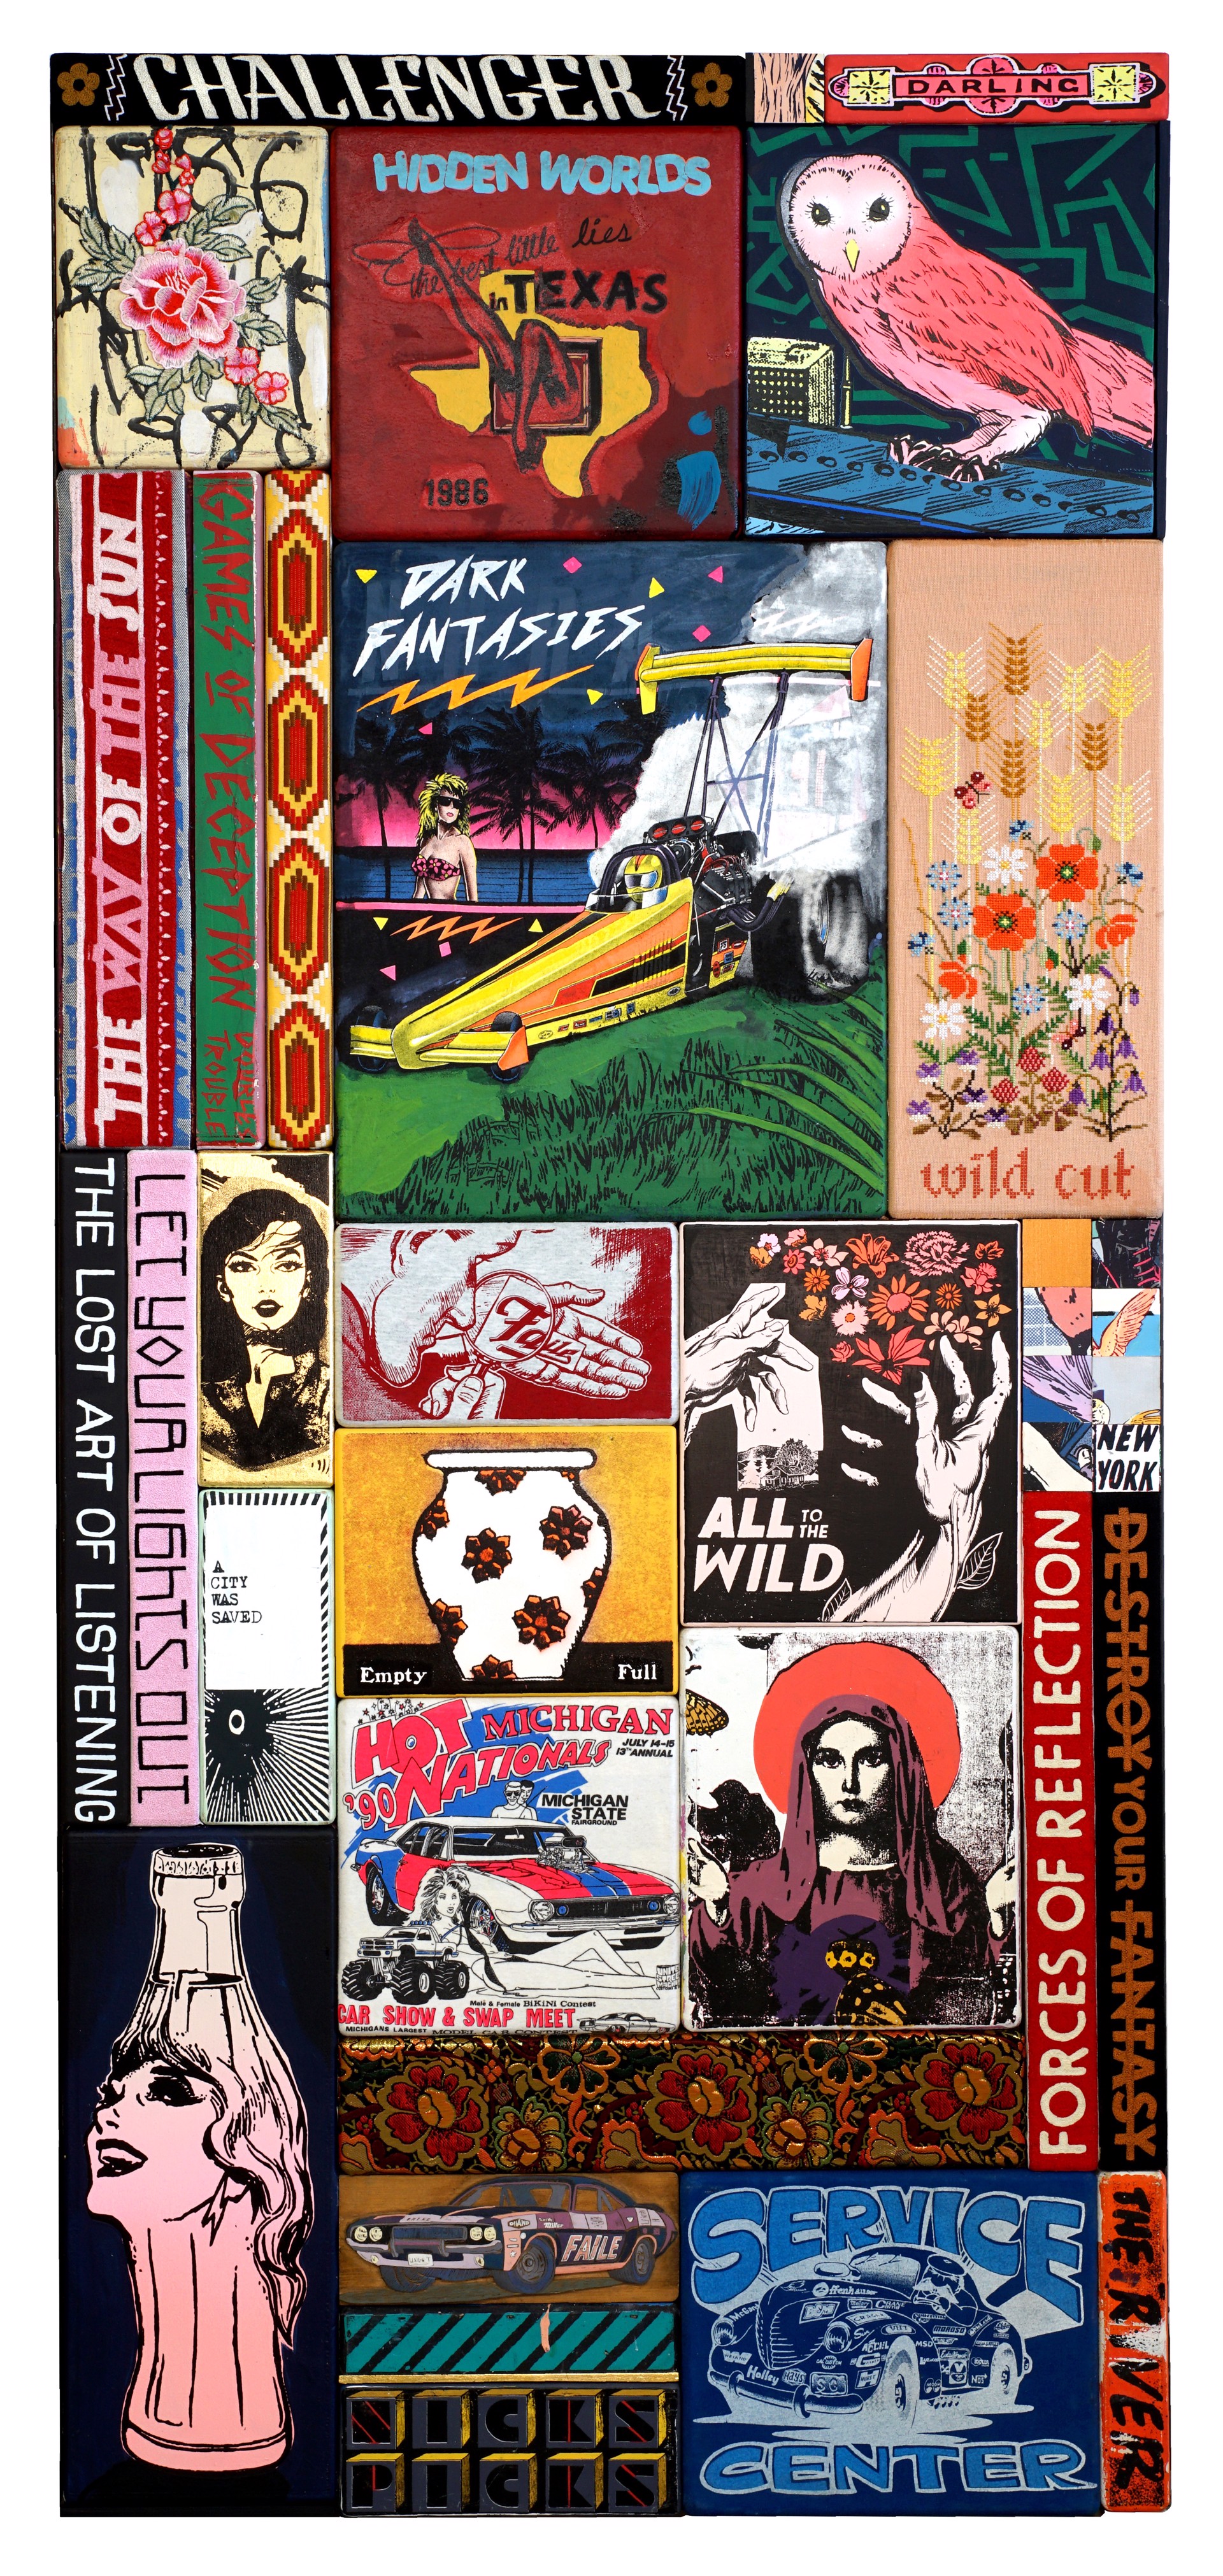 Listening to the Wild by FAILE